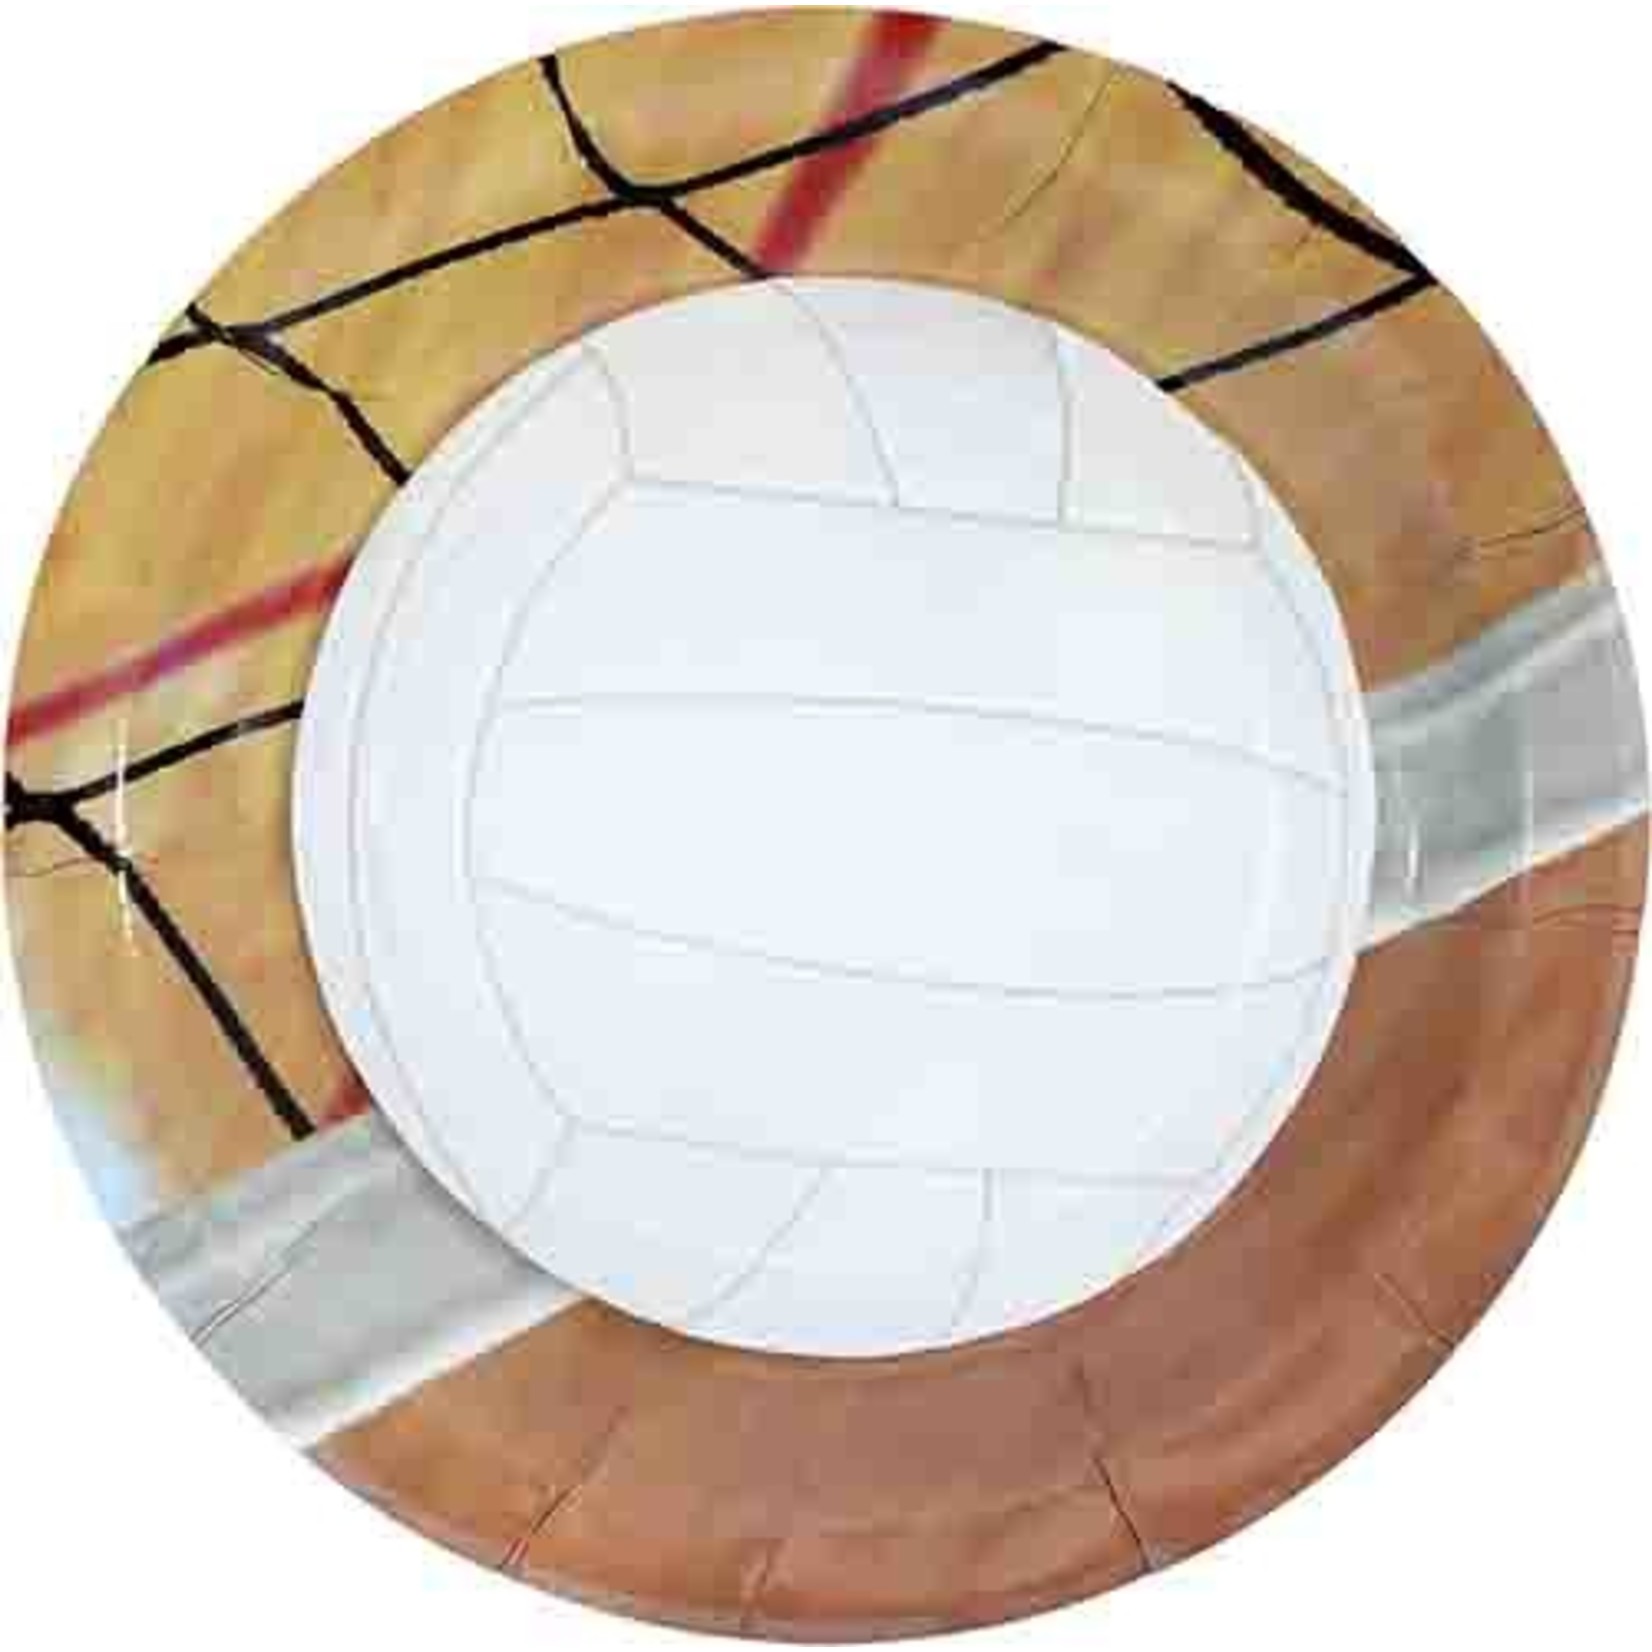 Havercamp 9" Volleyball Plates - 8ct.